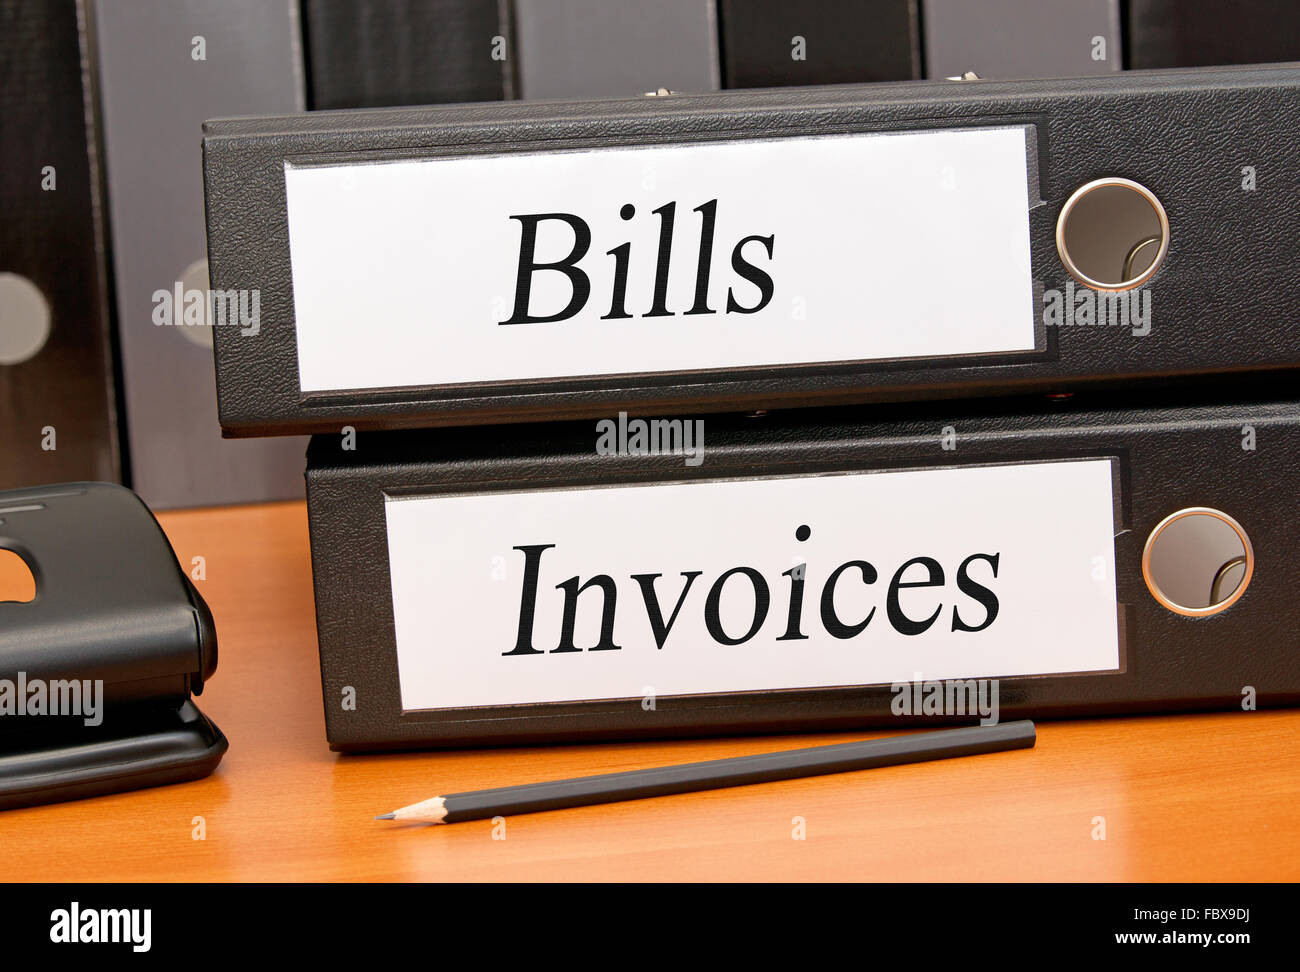 Bills and Invoices Stock Photo